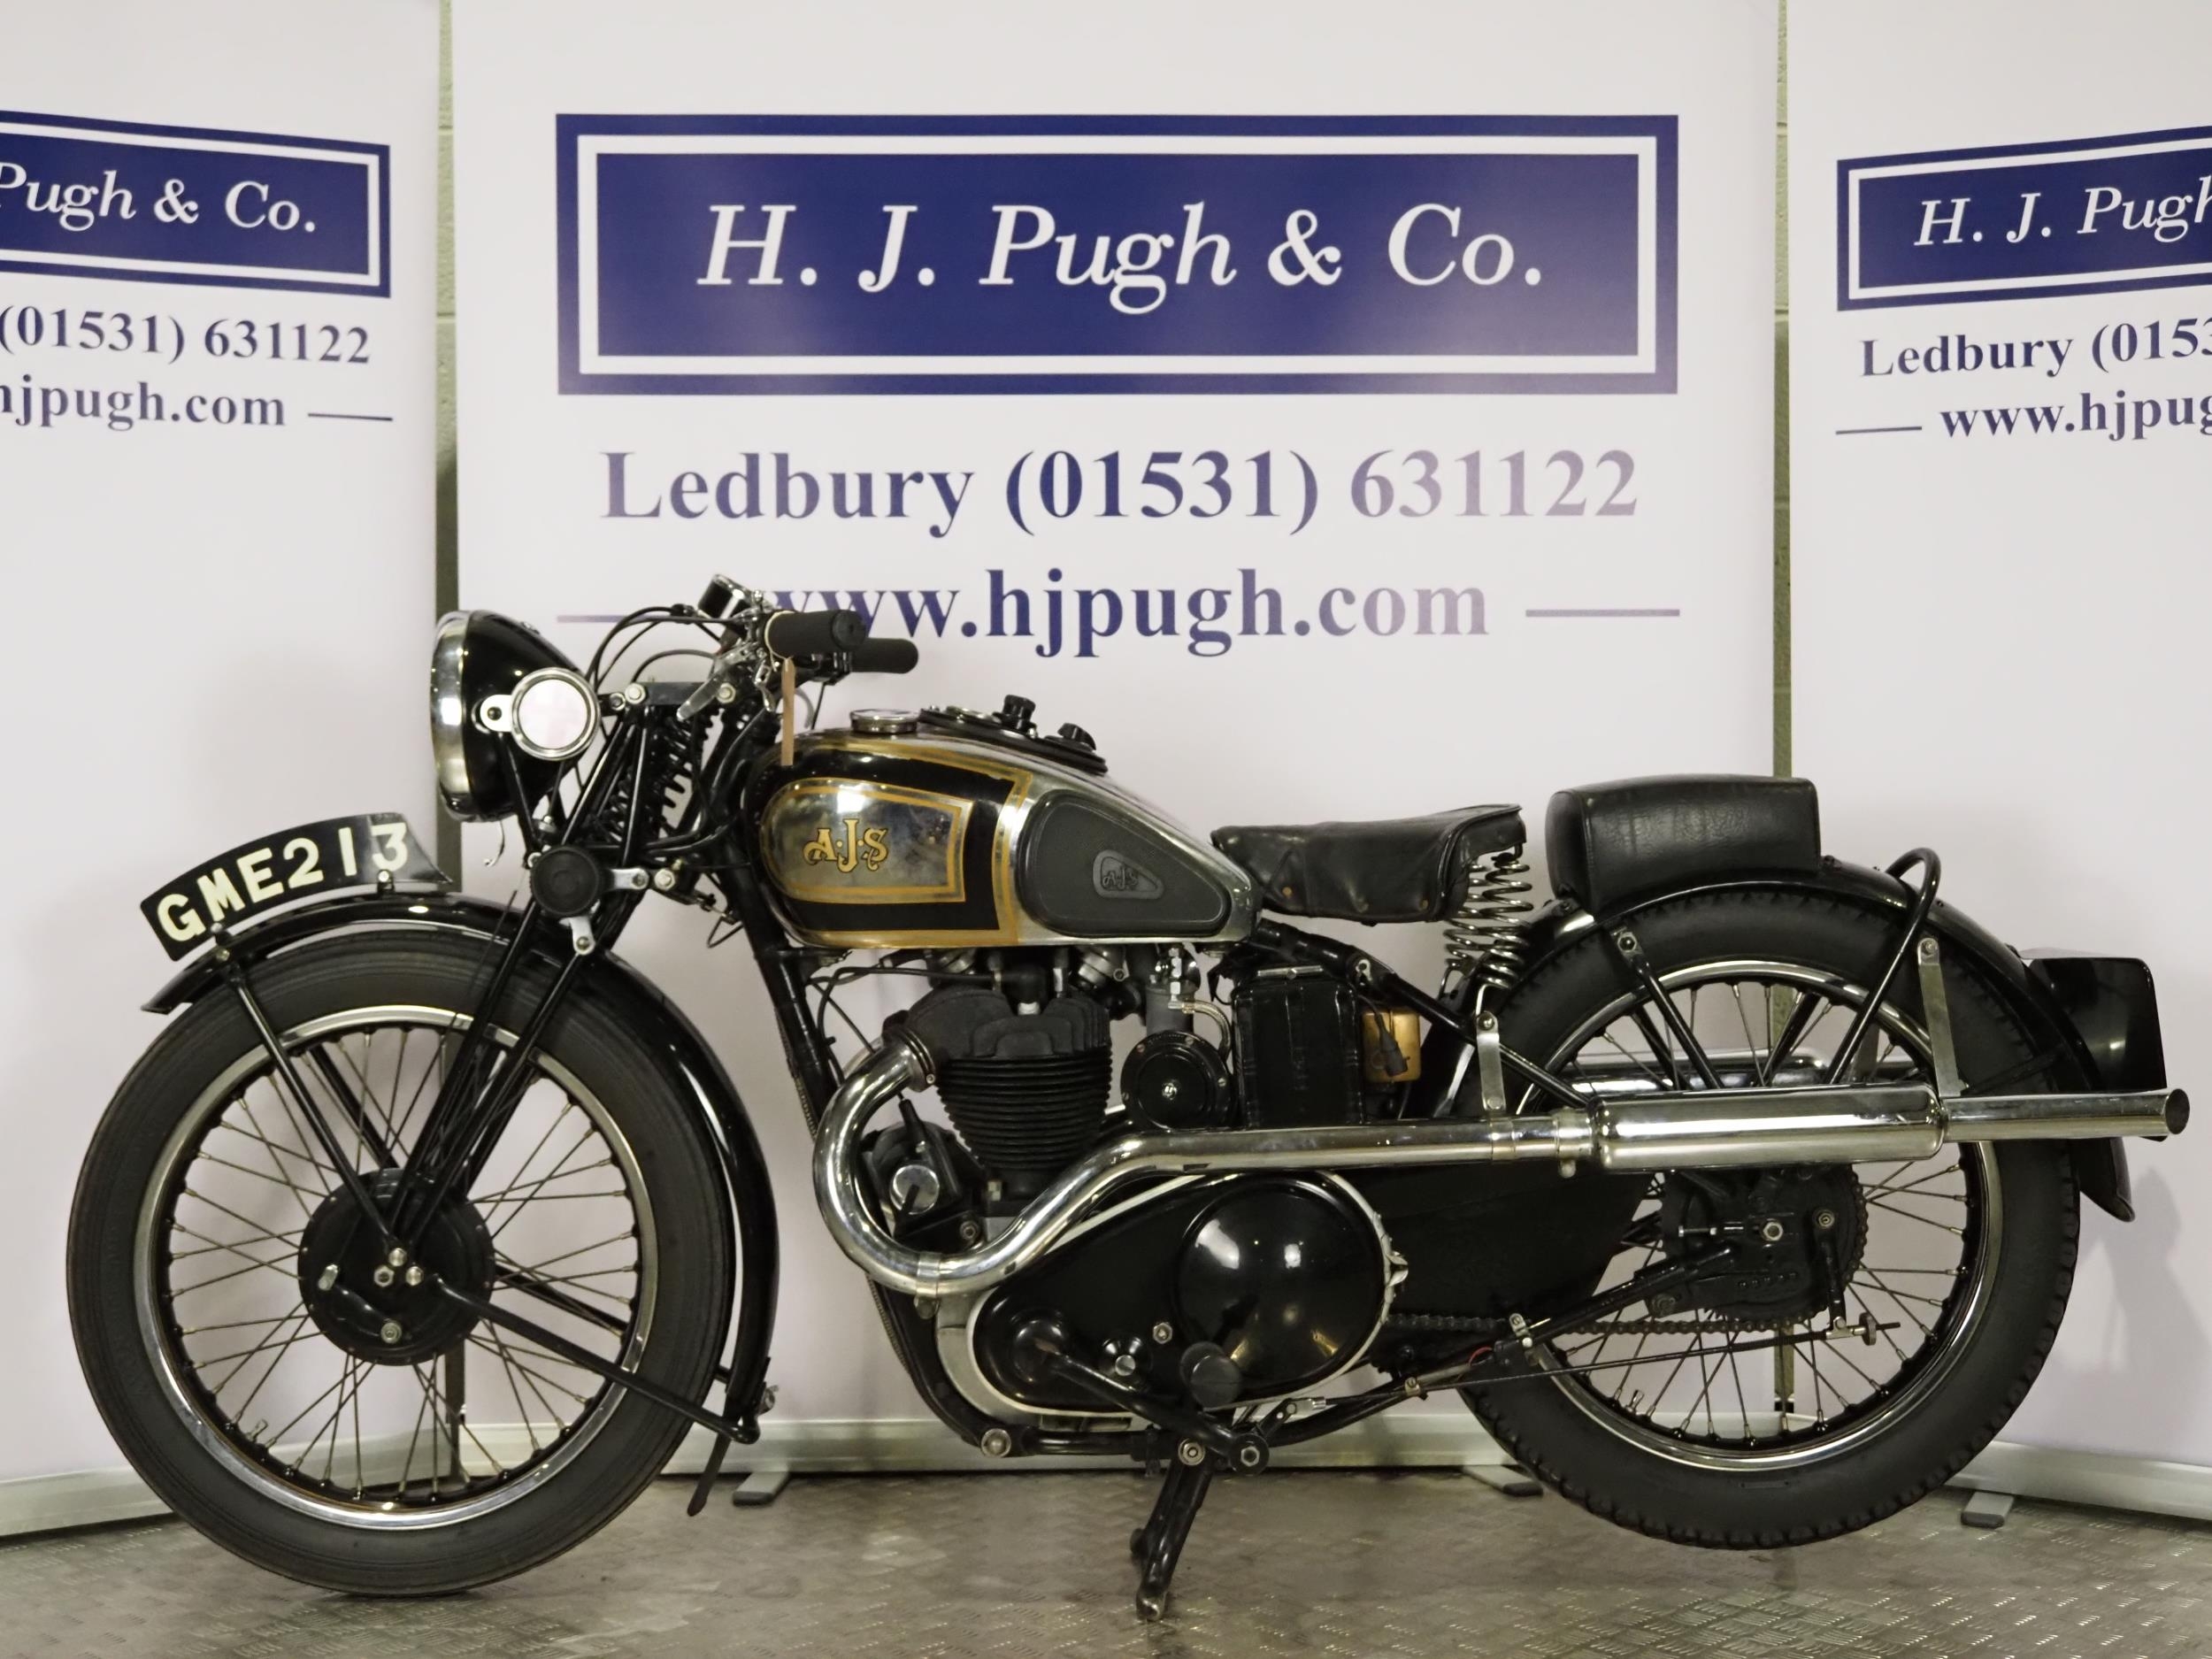 AJS Model 26 motorcycle. 1937. 347cc Frame No. 6431 Engine No. 37/26/5147S Runs and rides, last - Image 13 of 13